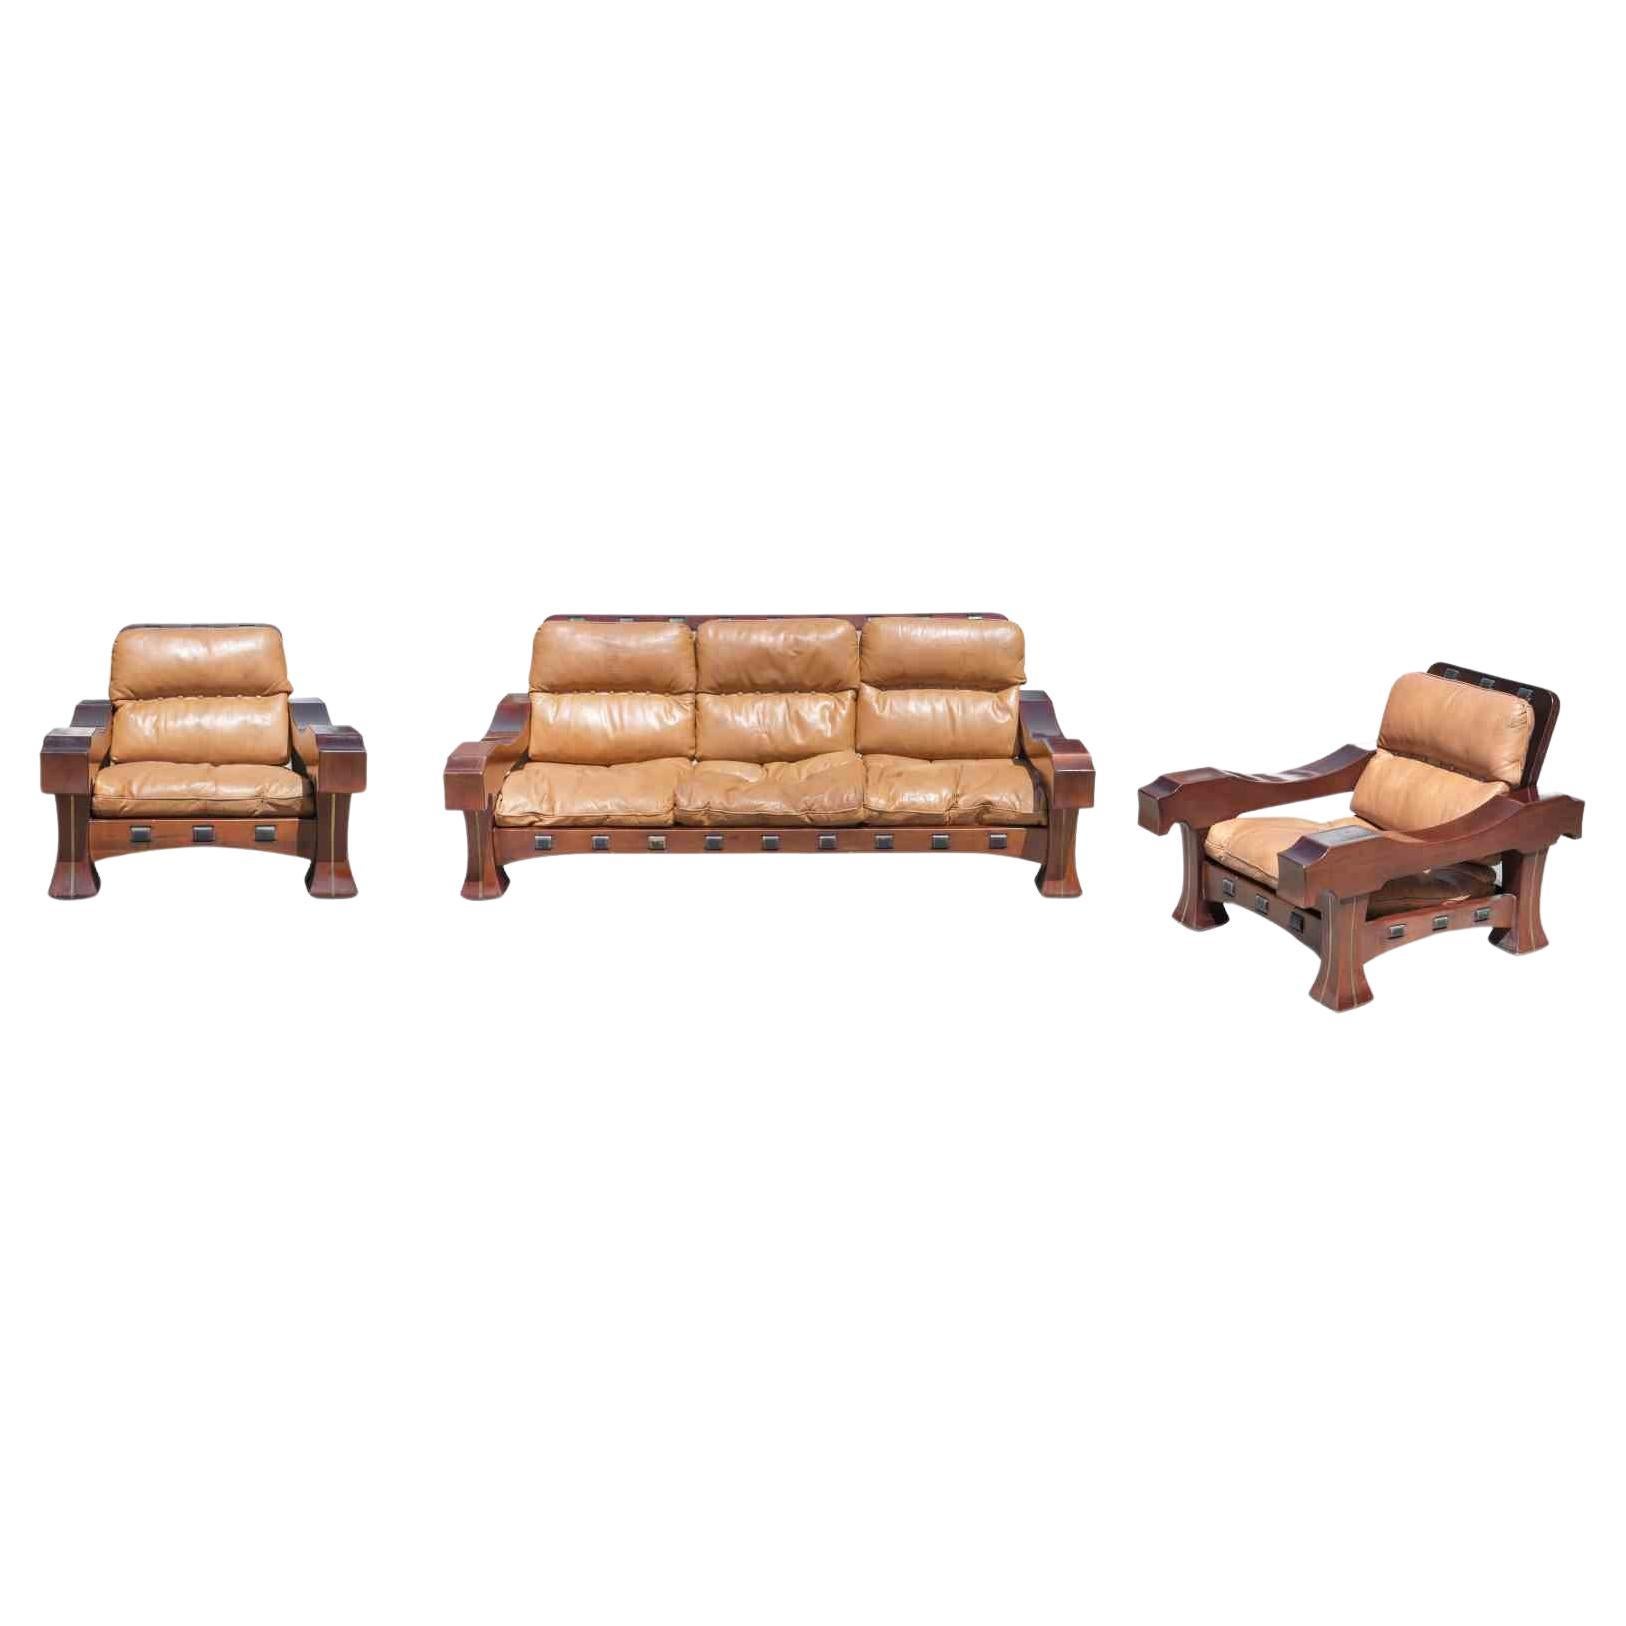 "Hussar" Sofa Set by Luciano Frigerio, 1970s For Sale